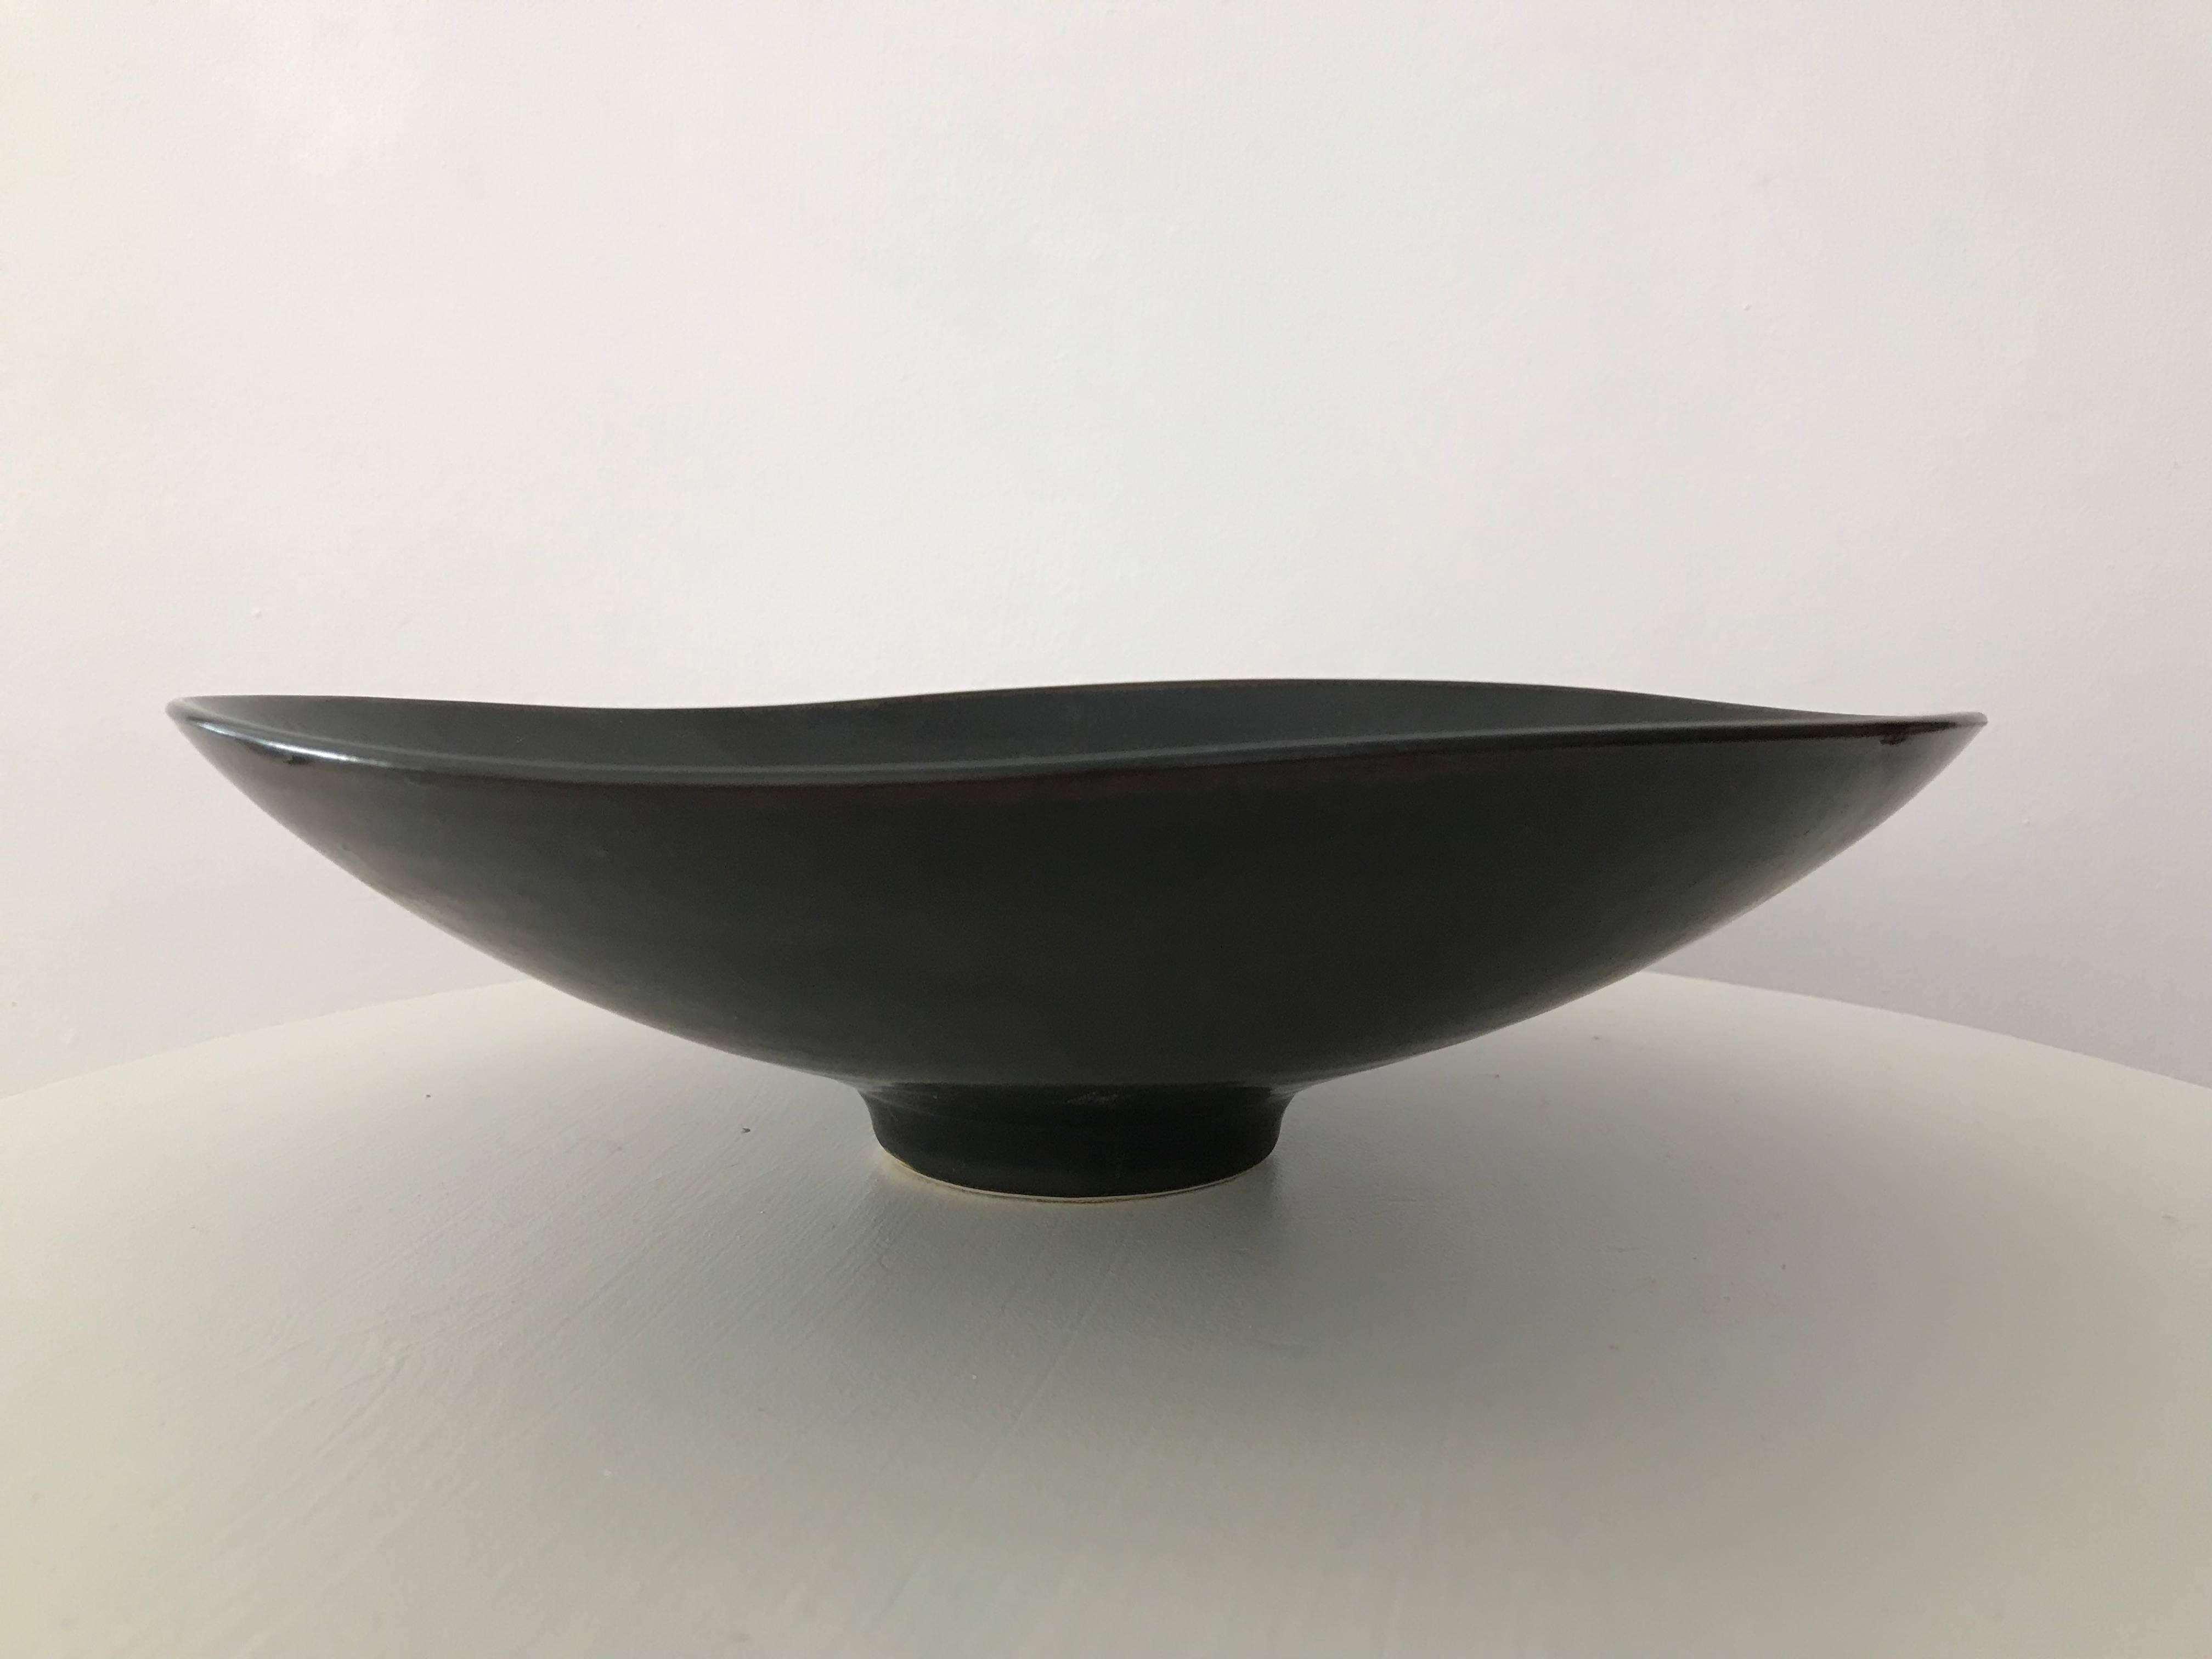 Sleek and nicely executed black haresfur glazed biomorphic footed bowl, designed by Carl Harry Stålhane for Rörstrand, Sweden, circa 1960s. Some minor abrasions/marks underneath as seen in the pictures - but no chips or cracks. Presents